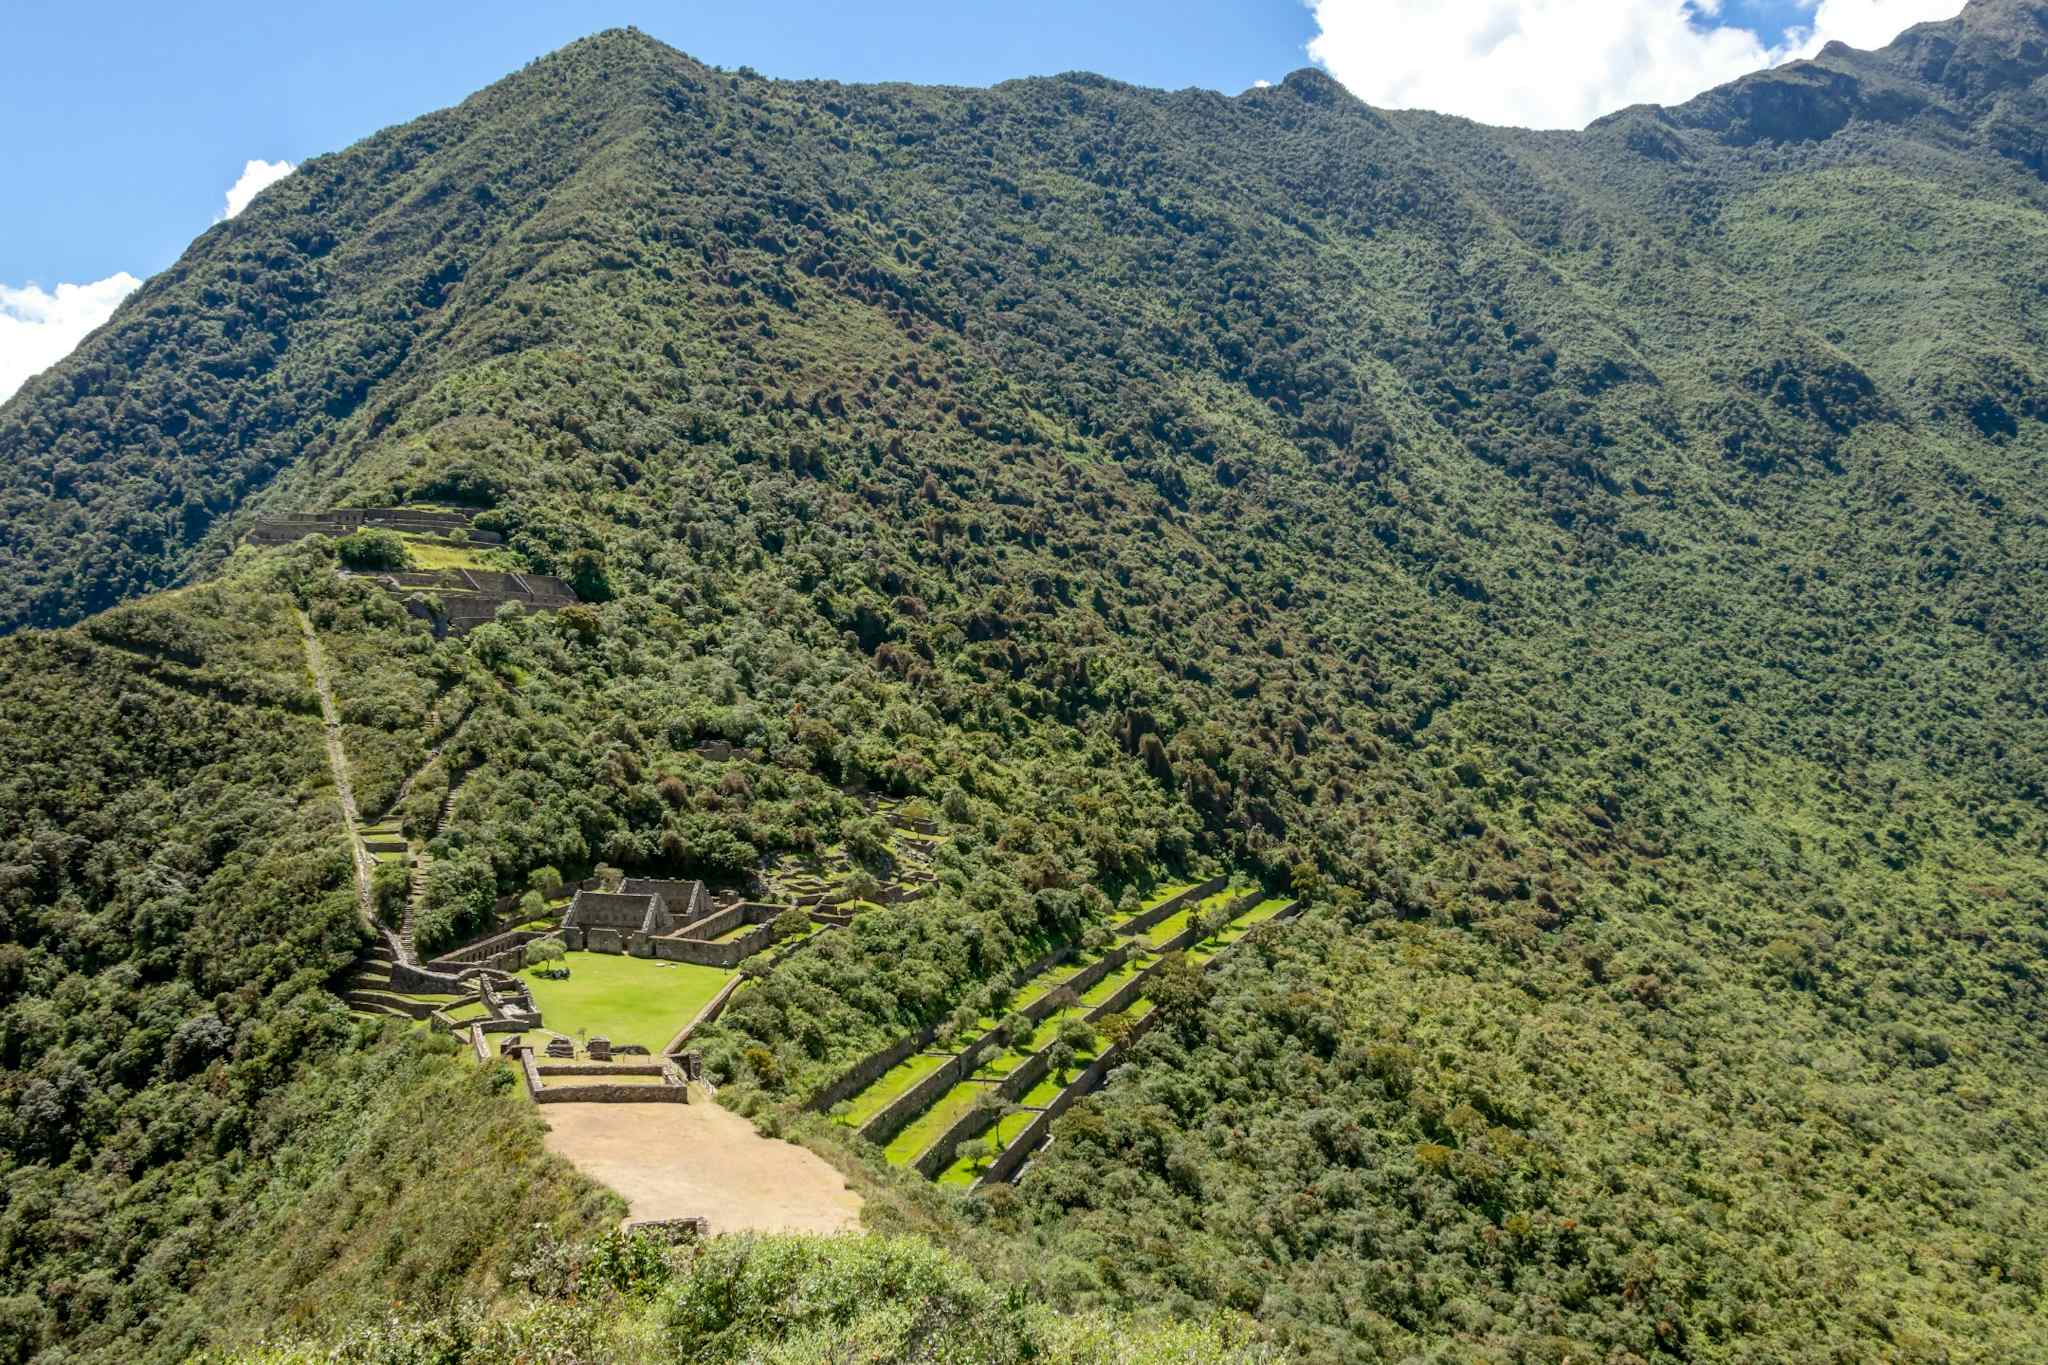 Choquequirao ruins on a mountaintop clearing above the Apurimac Jungle. Photo: Canva link: https://www.canva.com/photos/MADm3f1Hlwg-choquequirao-ancient-archaeological-complex-that-towers-above-the-apurimac-river-canyon-and-rests-atop-a-flattened-hill/